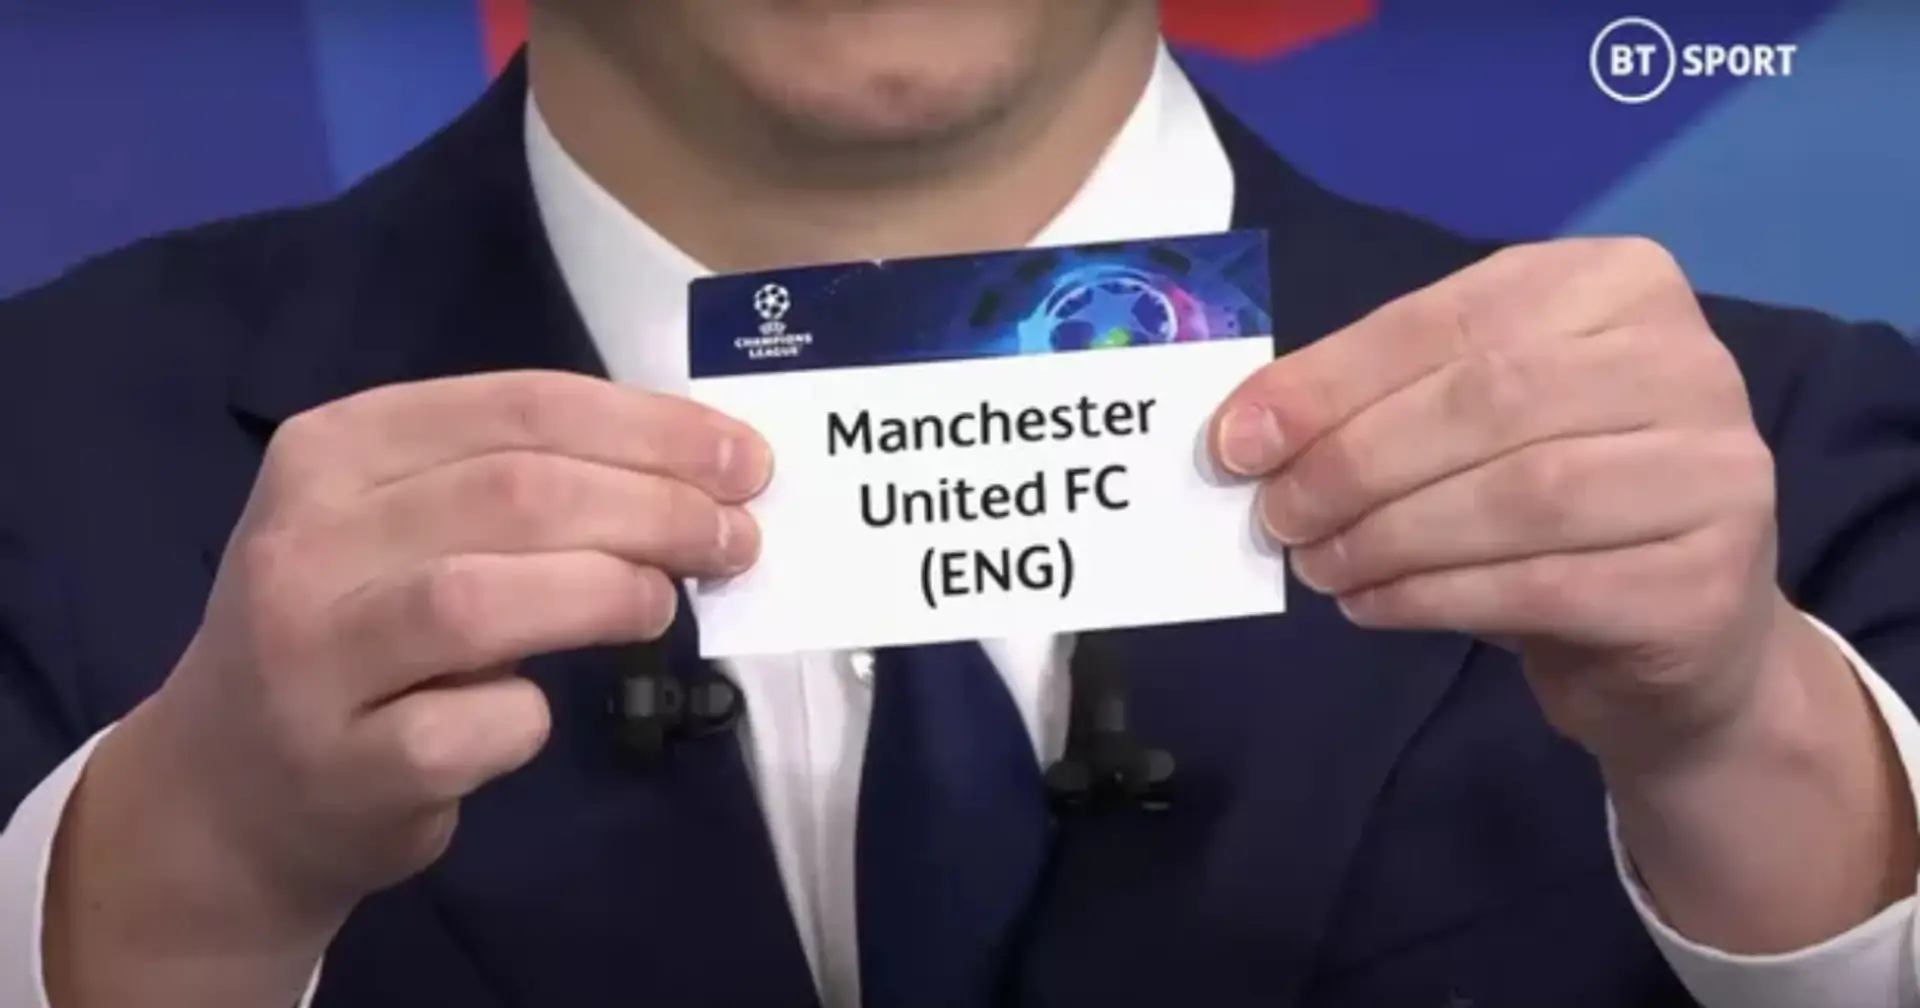 Champions League group stage pots confirmed — Man United could get Barcelona